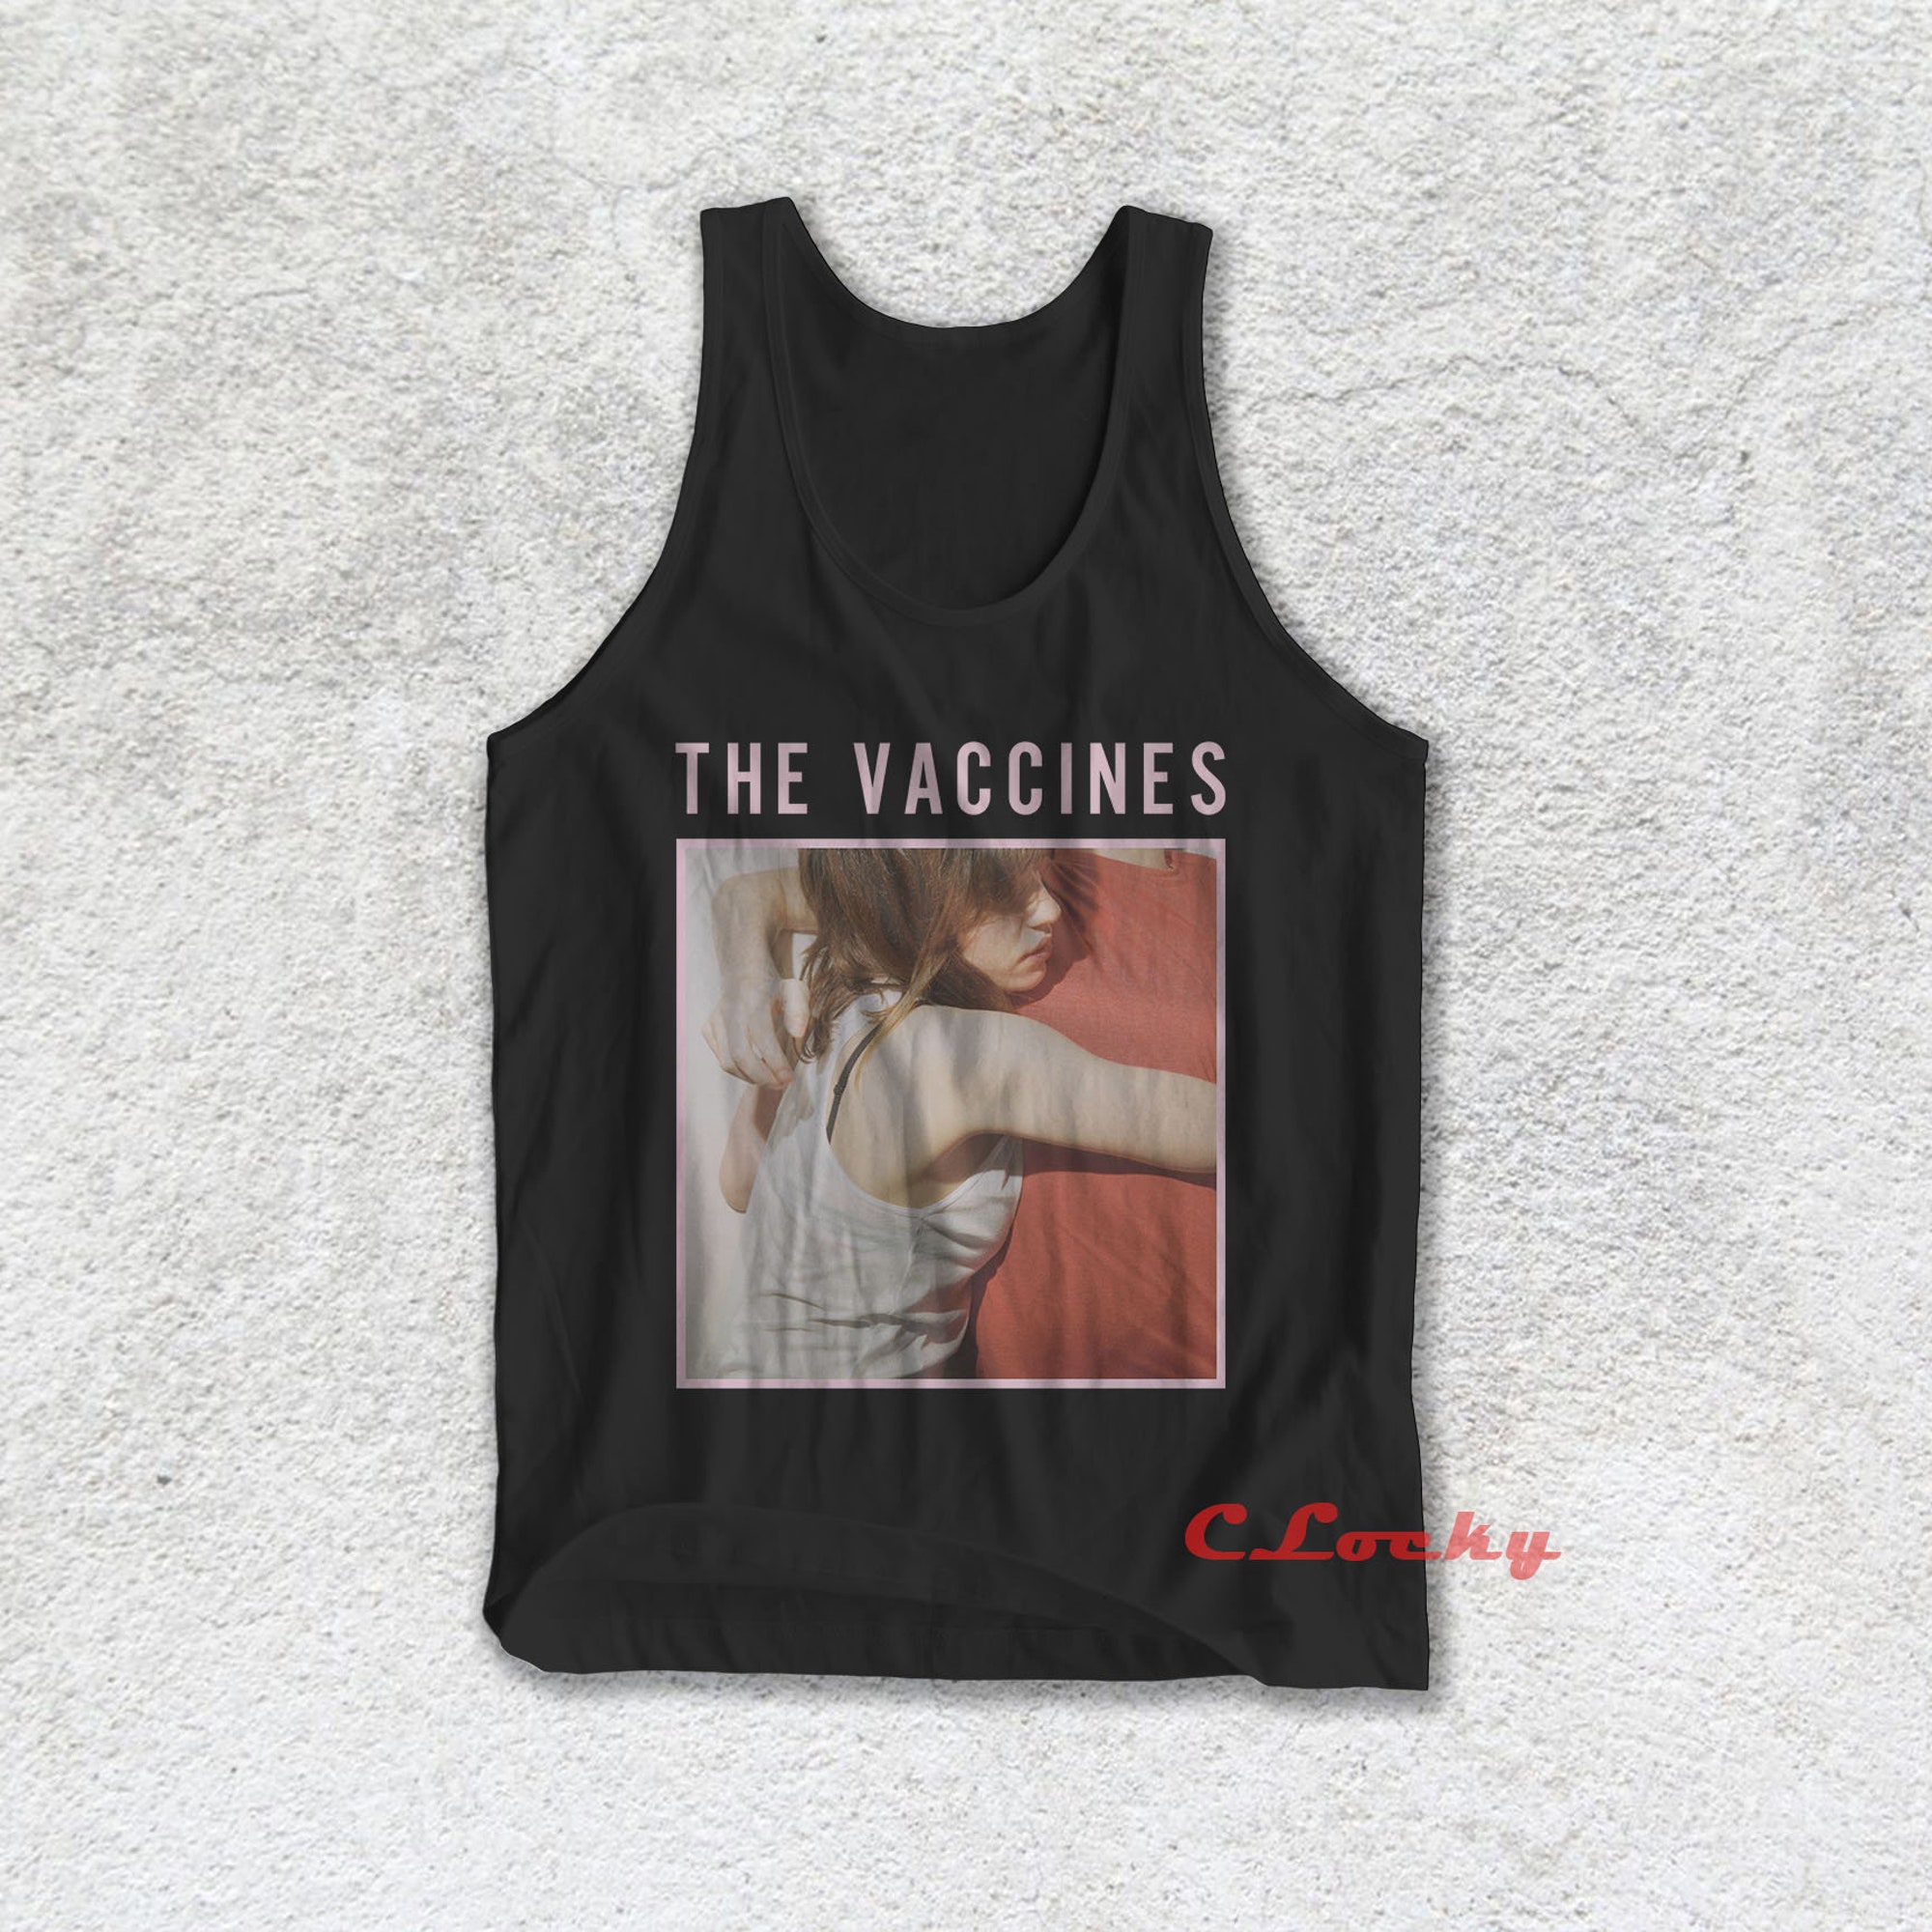 Discover The Vaccines T-Shirt English Indie Rock Music Band What did you expect Tank Top